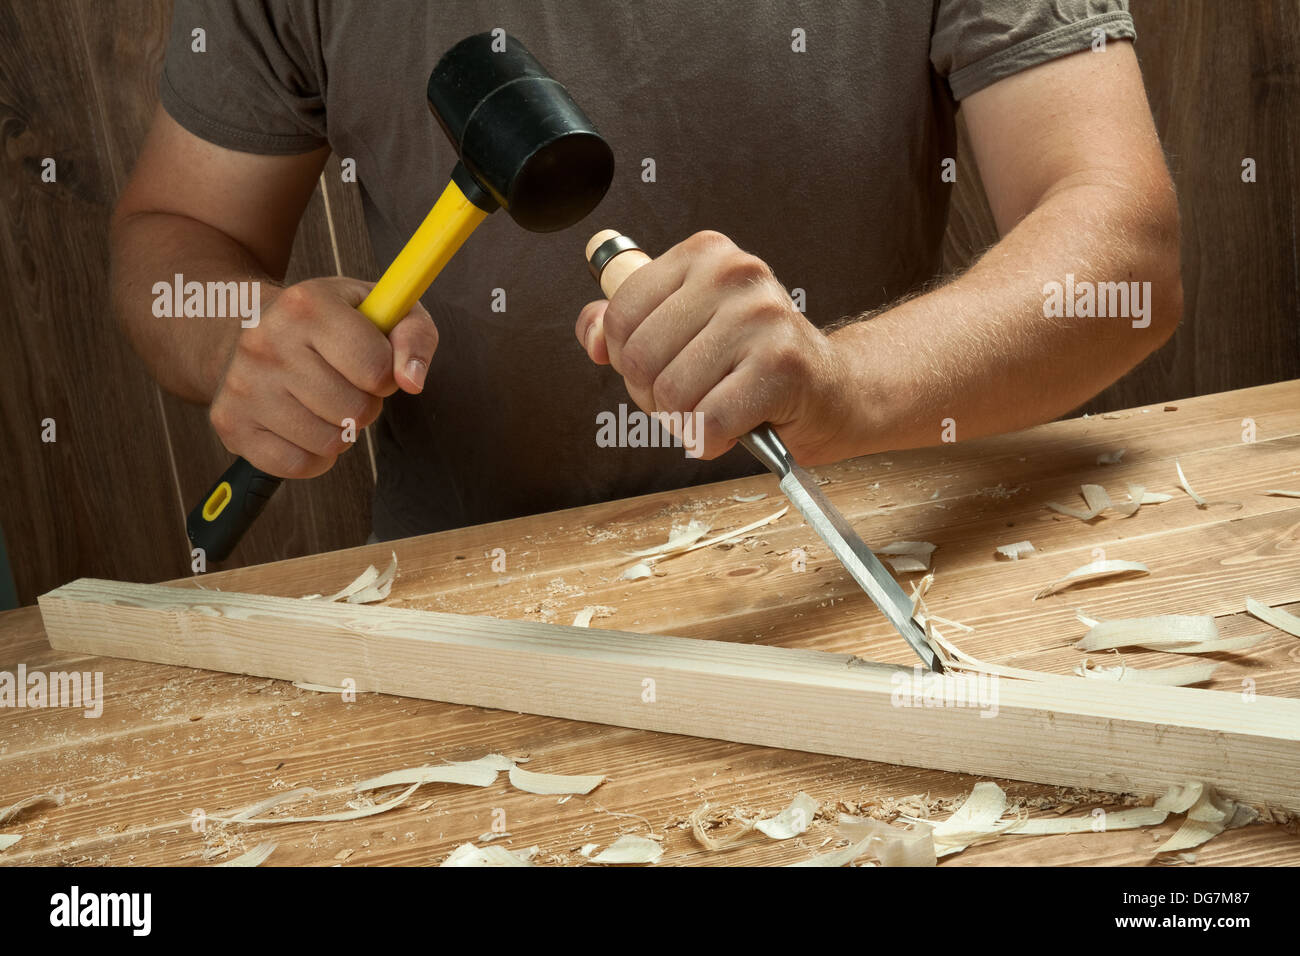 Wood workshop. Carpenter working with chisel. Stock Photo